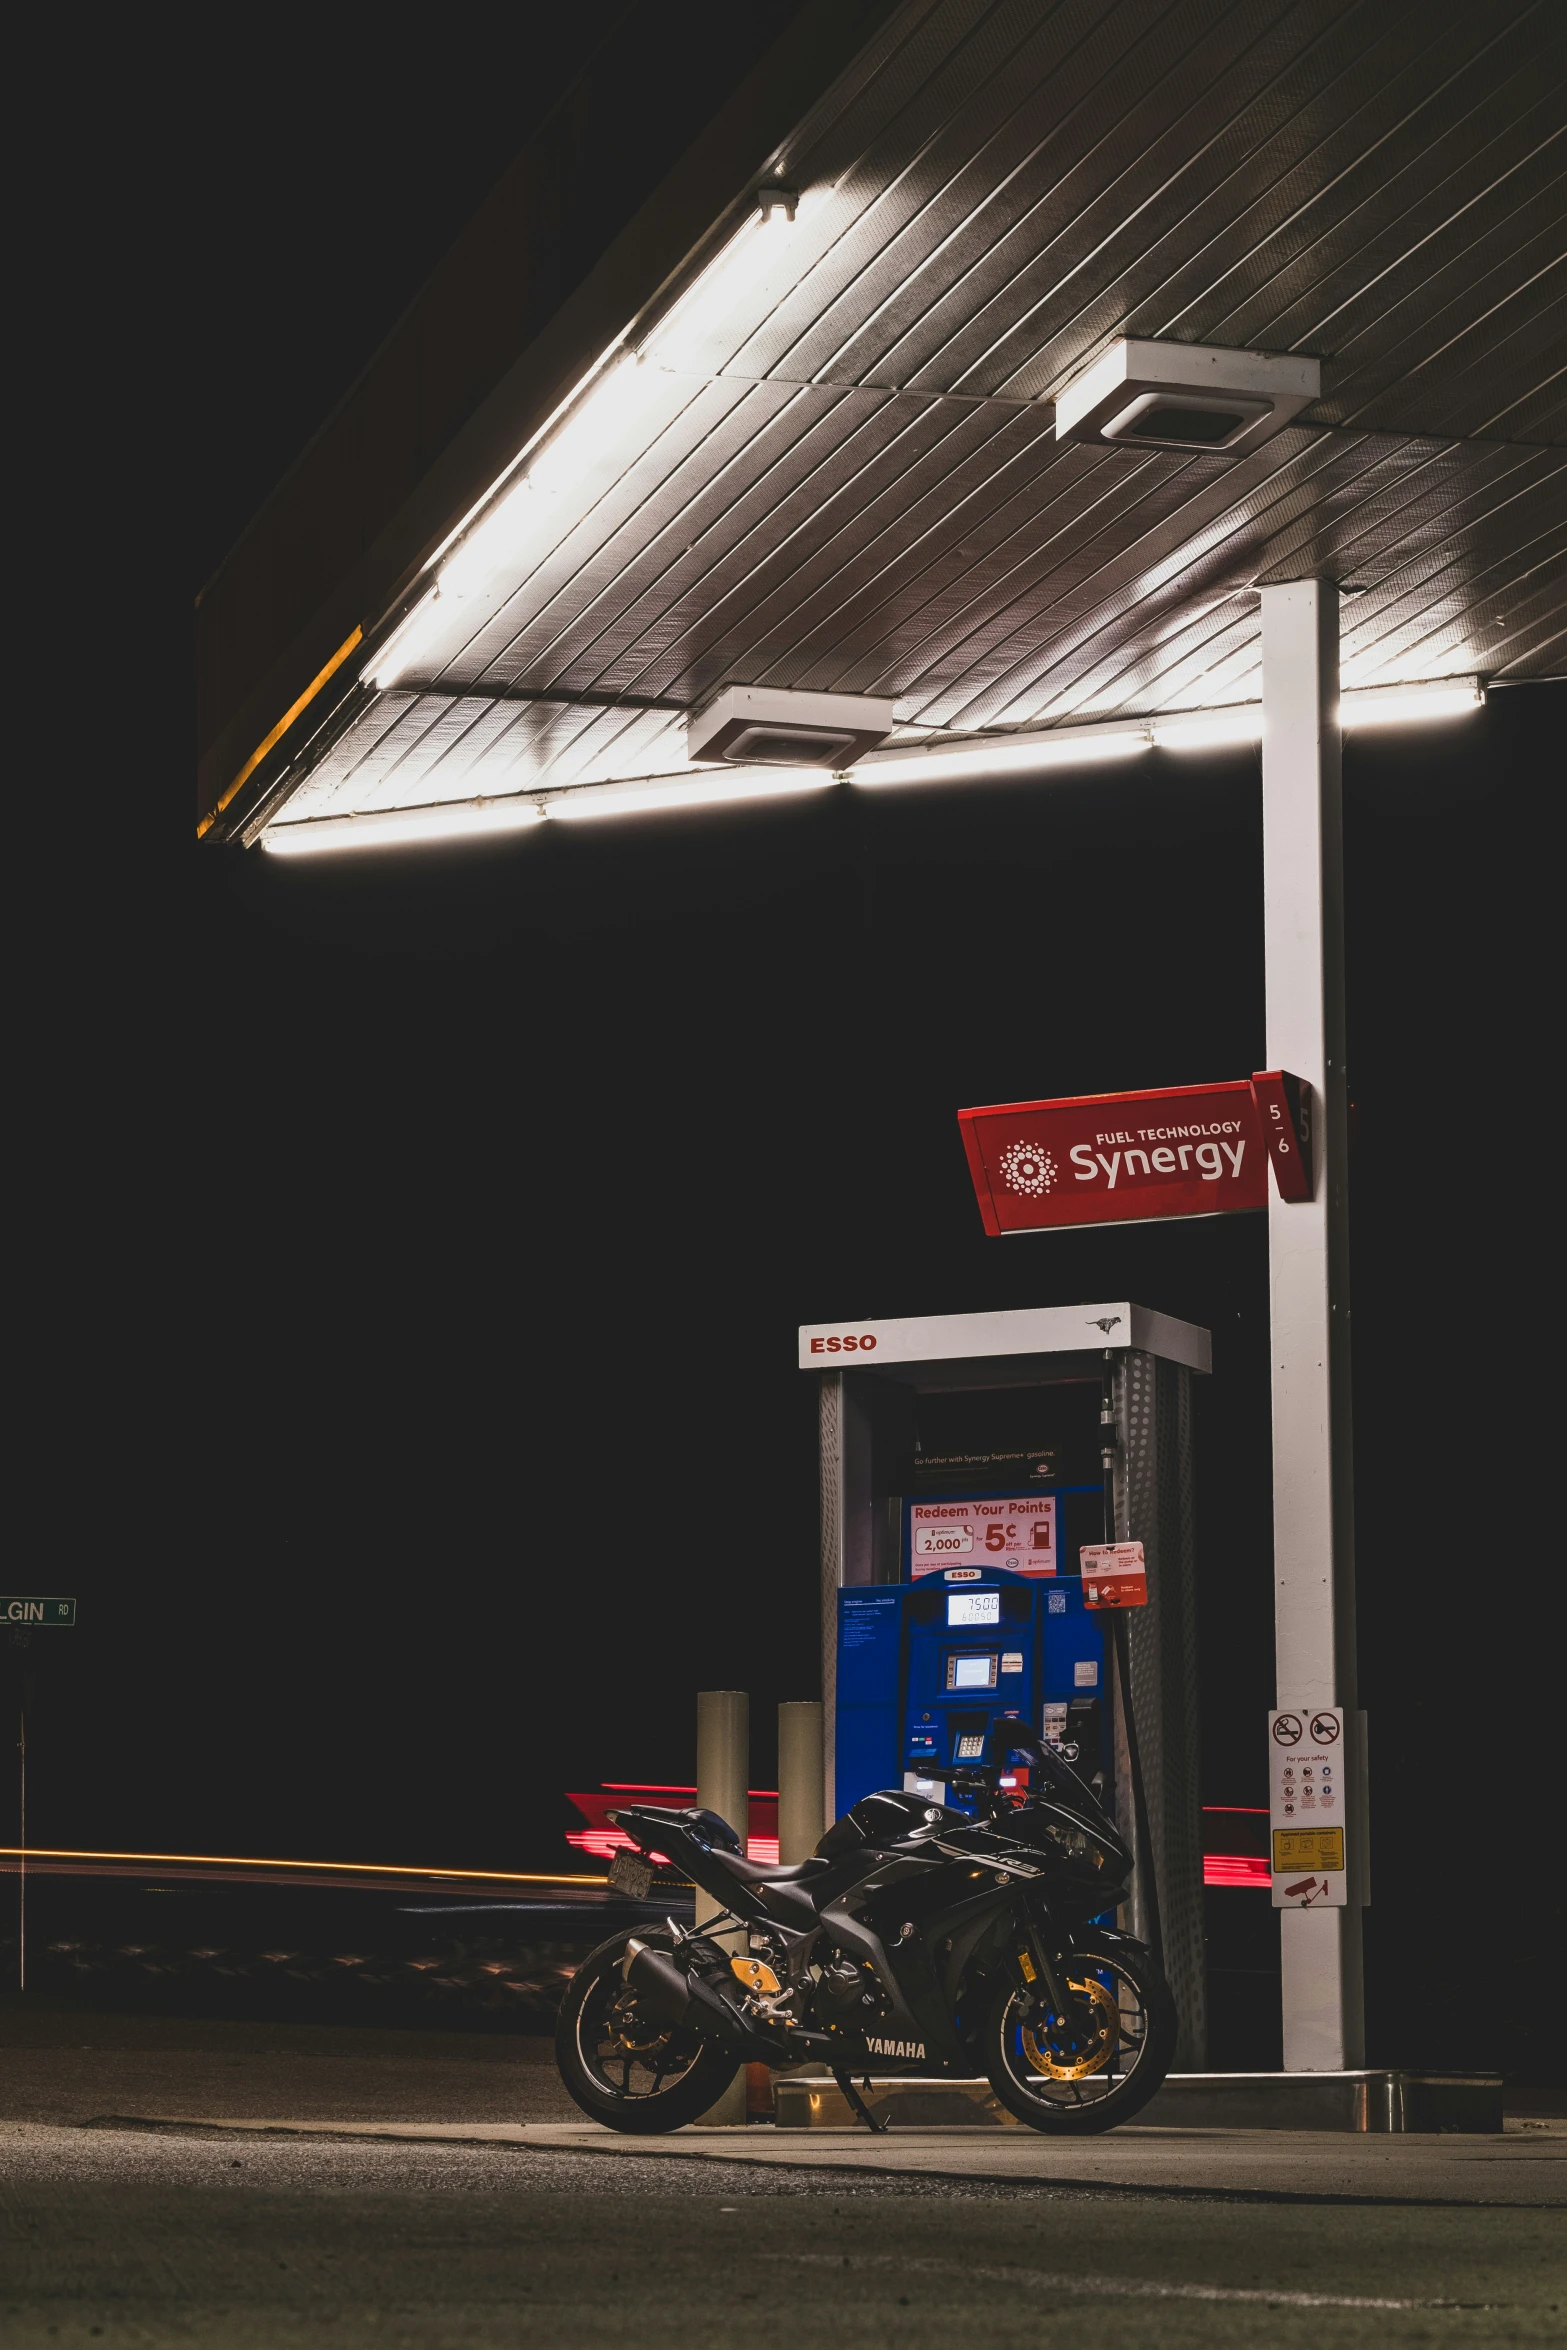 motorcycles at an energy fuel station at night